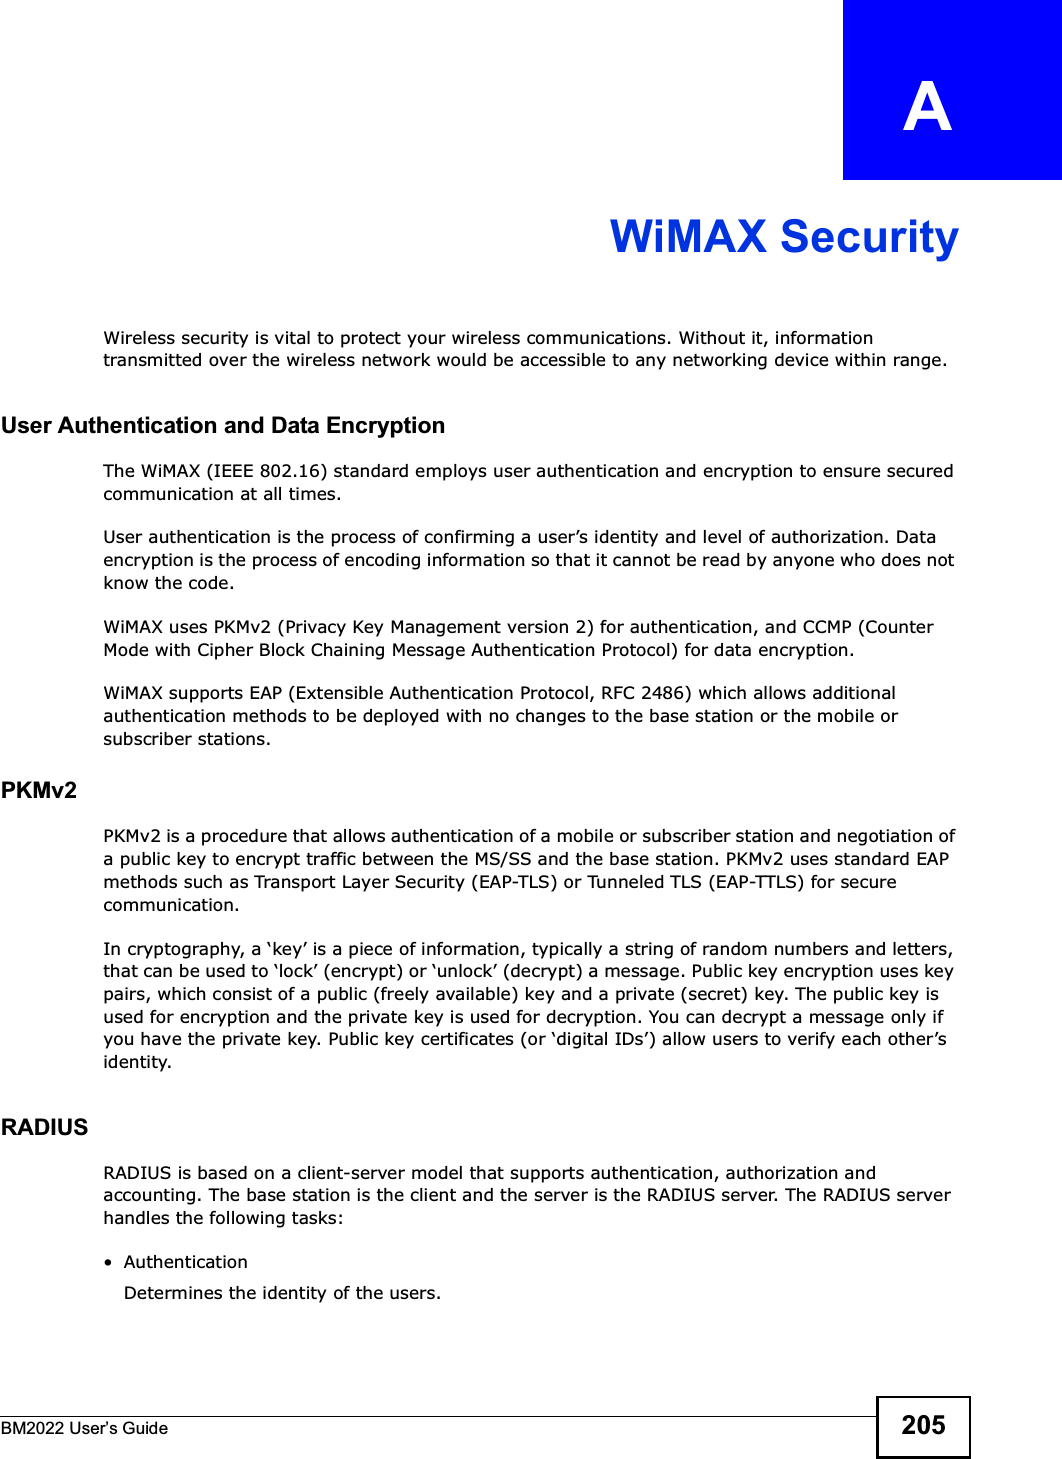 BM2022 Users Guide 205APPENDIX   AWiMAX SecurityWireless security is vital to protect your wireless communications. Without it, information transmitted over the wireless network would be accessible to any networking device within range.User Authentication and Data EncryptionThe WiMAX (IEEE 802.16) standard employs user authentication and encryption to ensure secured communication at all times.User authentication is the process of confirming a users identity and level of authorization. Data encryption is the process of encoding information so that it cannot be read by anyone who does not know the code. WiMAX uses PKMv2 (Privacy Key Management version 2) for authentication, and CCMP (Counter Mode with Cipher Block Chaining Message Authentication Protocol) for data encryption. WiMAX supports EAP (Extensible Authentication Protocol, RFC 2486) which allows additional authentication methods to be deployed with no changes to the base station or the mobile or subscriber stations.PKMv2PKMv2 is a procedure that allows authentication of a mobile or subscriber station and negotiation of a public key to encrypt traffic between the MS/SS and the base station. PKMv2 uses standard EAP methods such as Transport Layer Security (EAP-TLS) or Tunneled TLS (EAP-TTLS) for secure communication. In cryptography, a key is a piece of information, typically a string of random numbers and letters, that can be used to lock (encrypt) or unlock (decrypt) a message. Public key encryption uses key pairs, which consist of a public (freely available) key and a private (secret) key. The public key is used for encryption and the private key is used for decryption. You can decrypt a message only if you have the private key. Public key certificates (or digital IDs) allow users to verify each others identity. RADIUSRADIUS is based on a client-server model that supports authentication, authorization and accounting. The base station is the client and the server is the RADIUS server. The RADIUS server handles the following tasks: Authentication Determines the identity of the users.